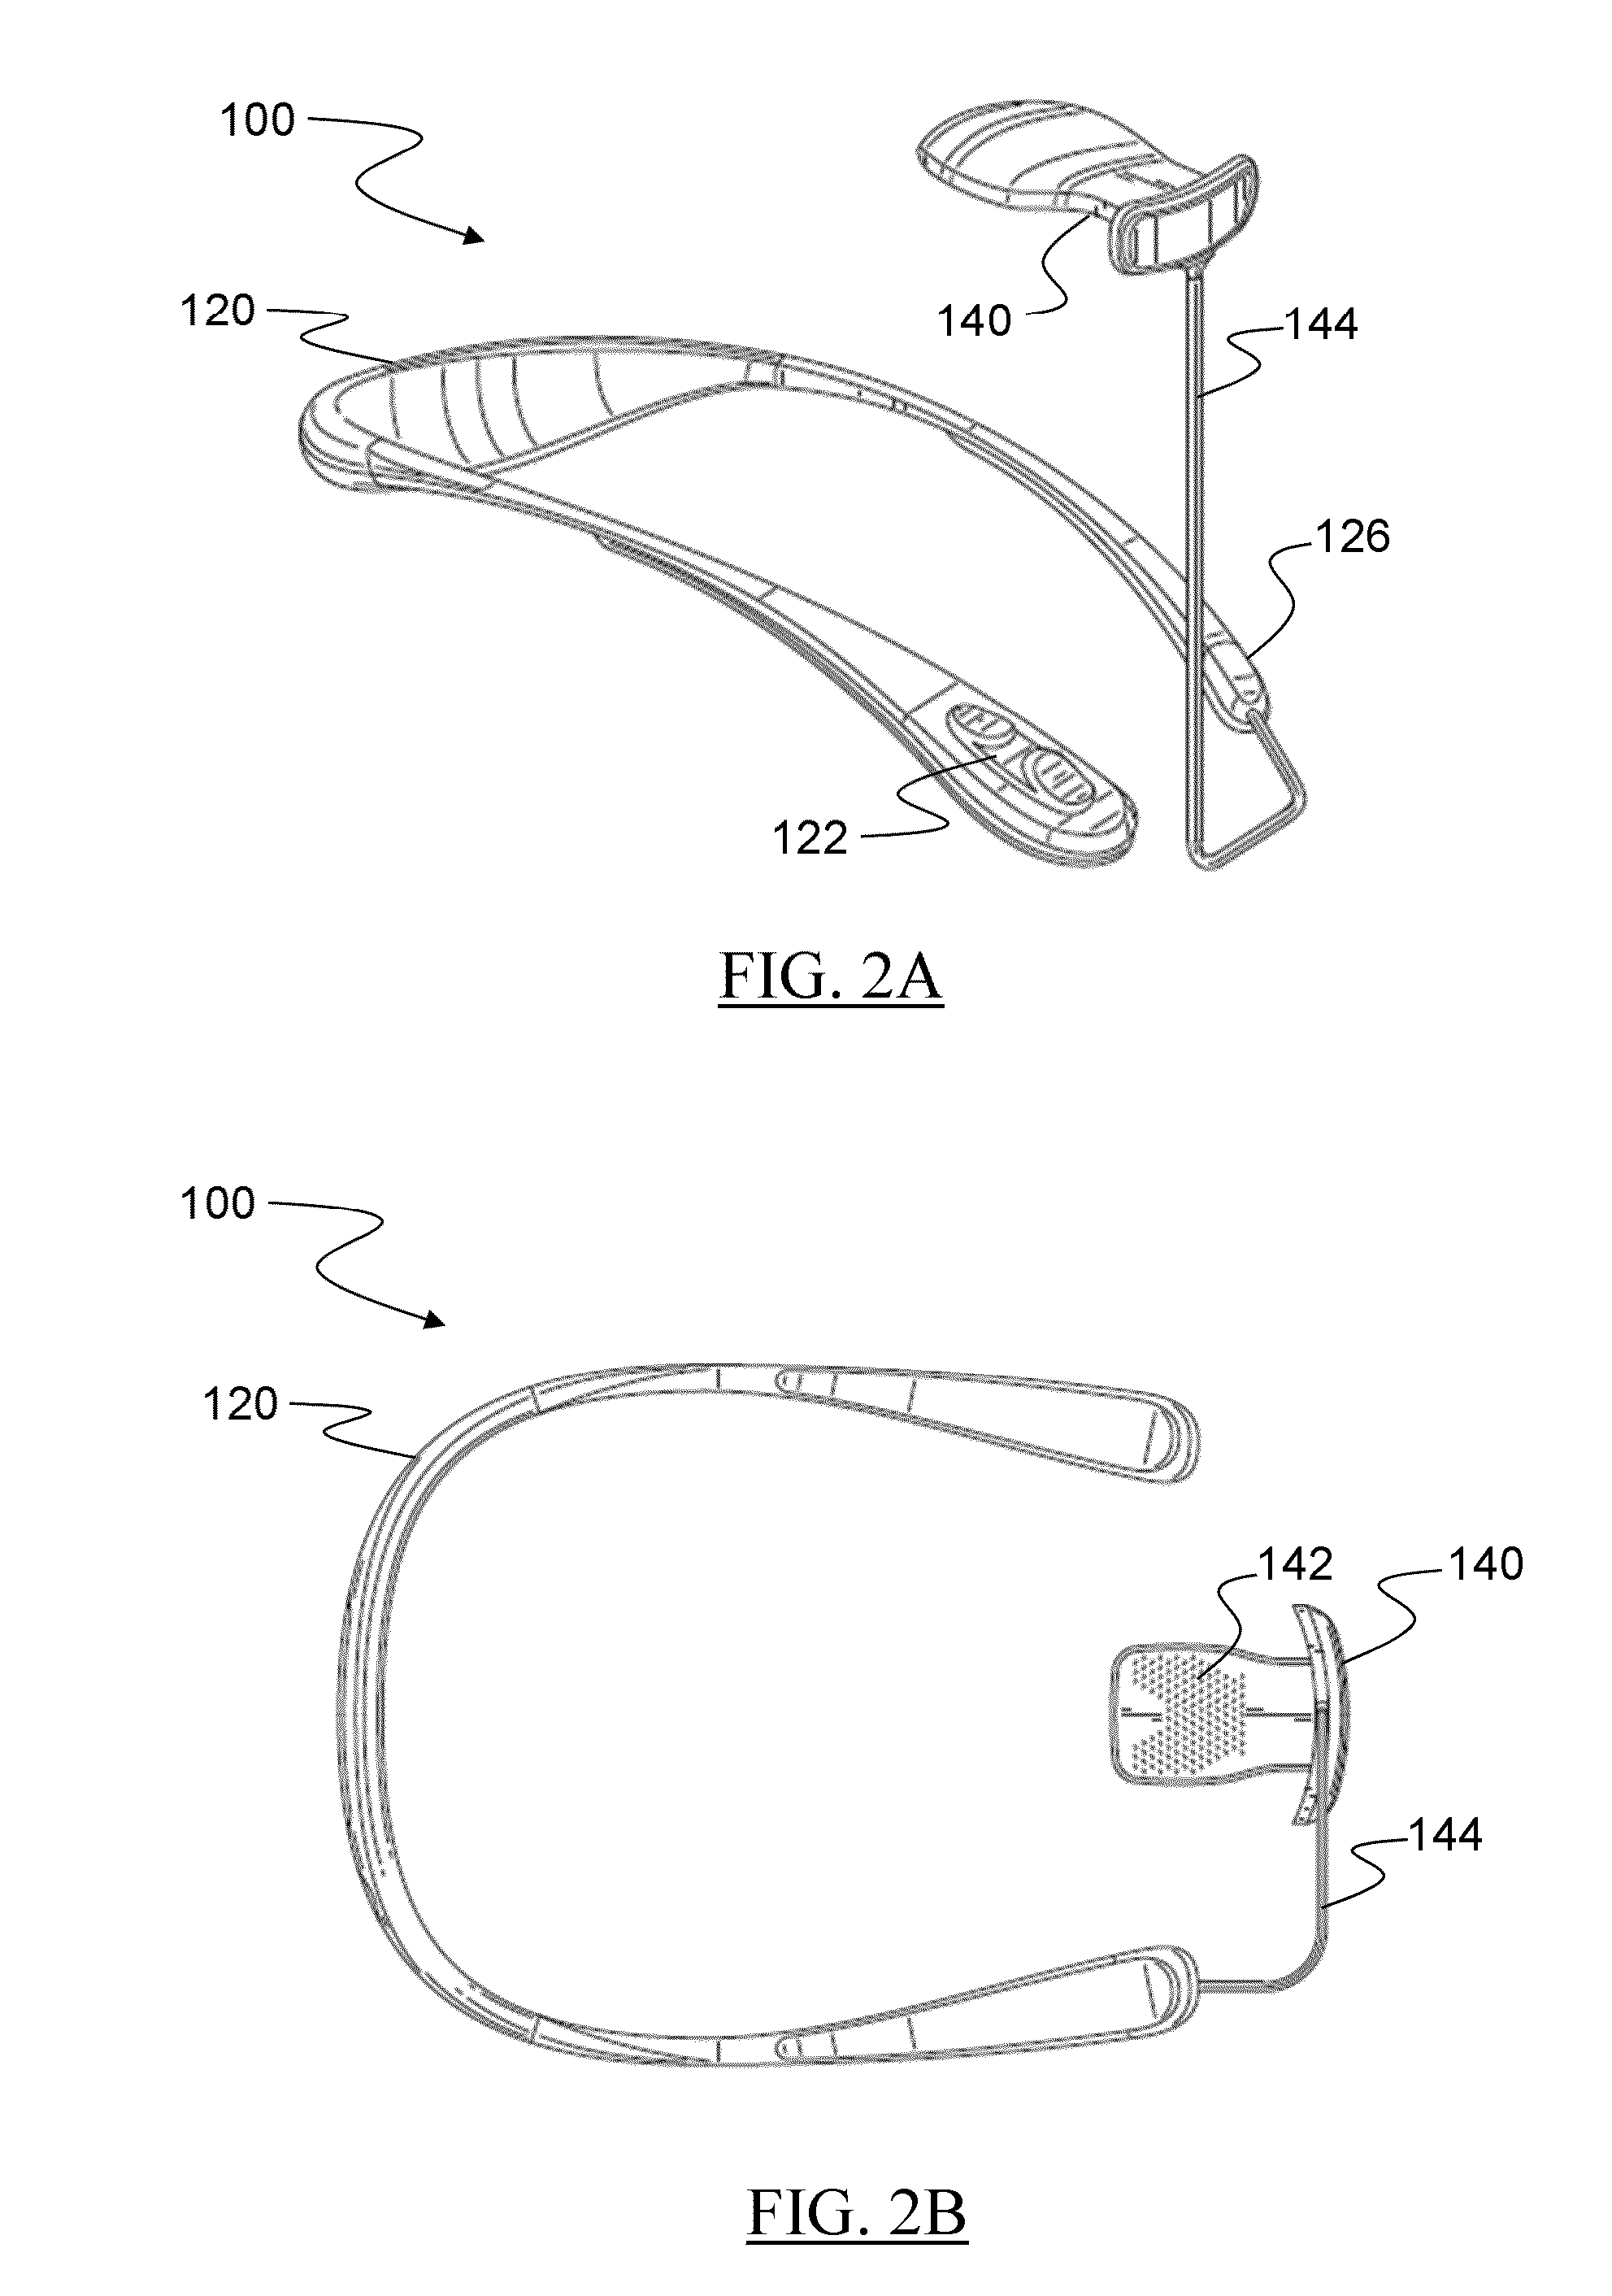 Methods of Manufacturing Devices for the Neurorehabilitation of a Patient